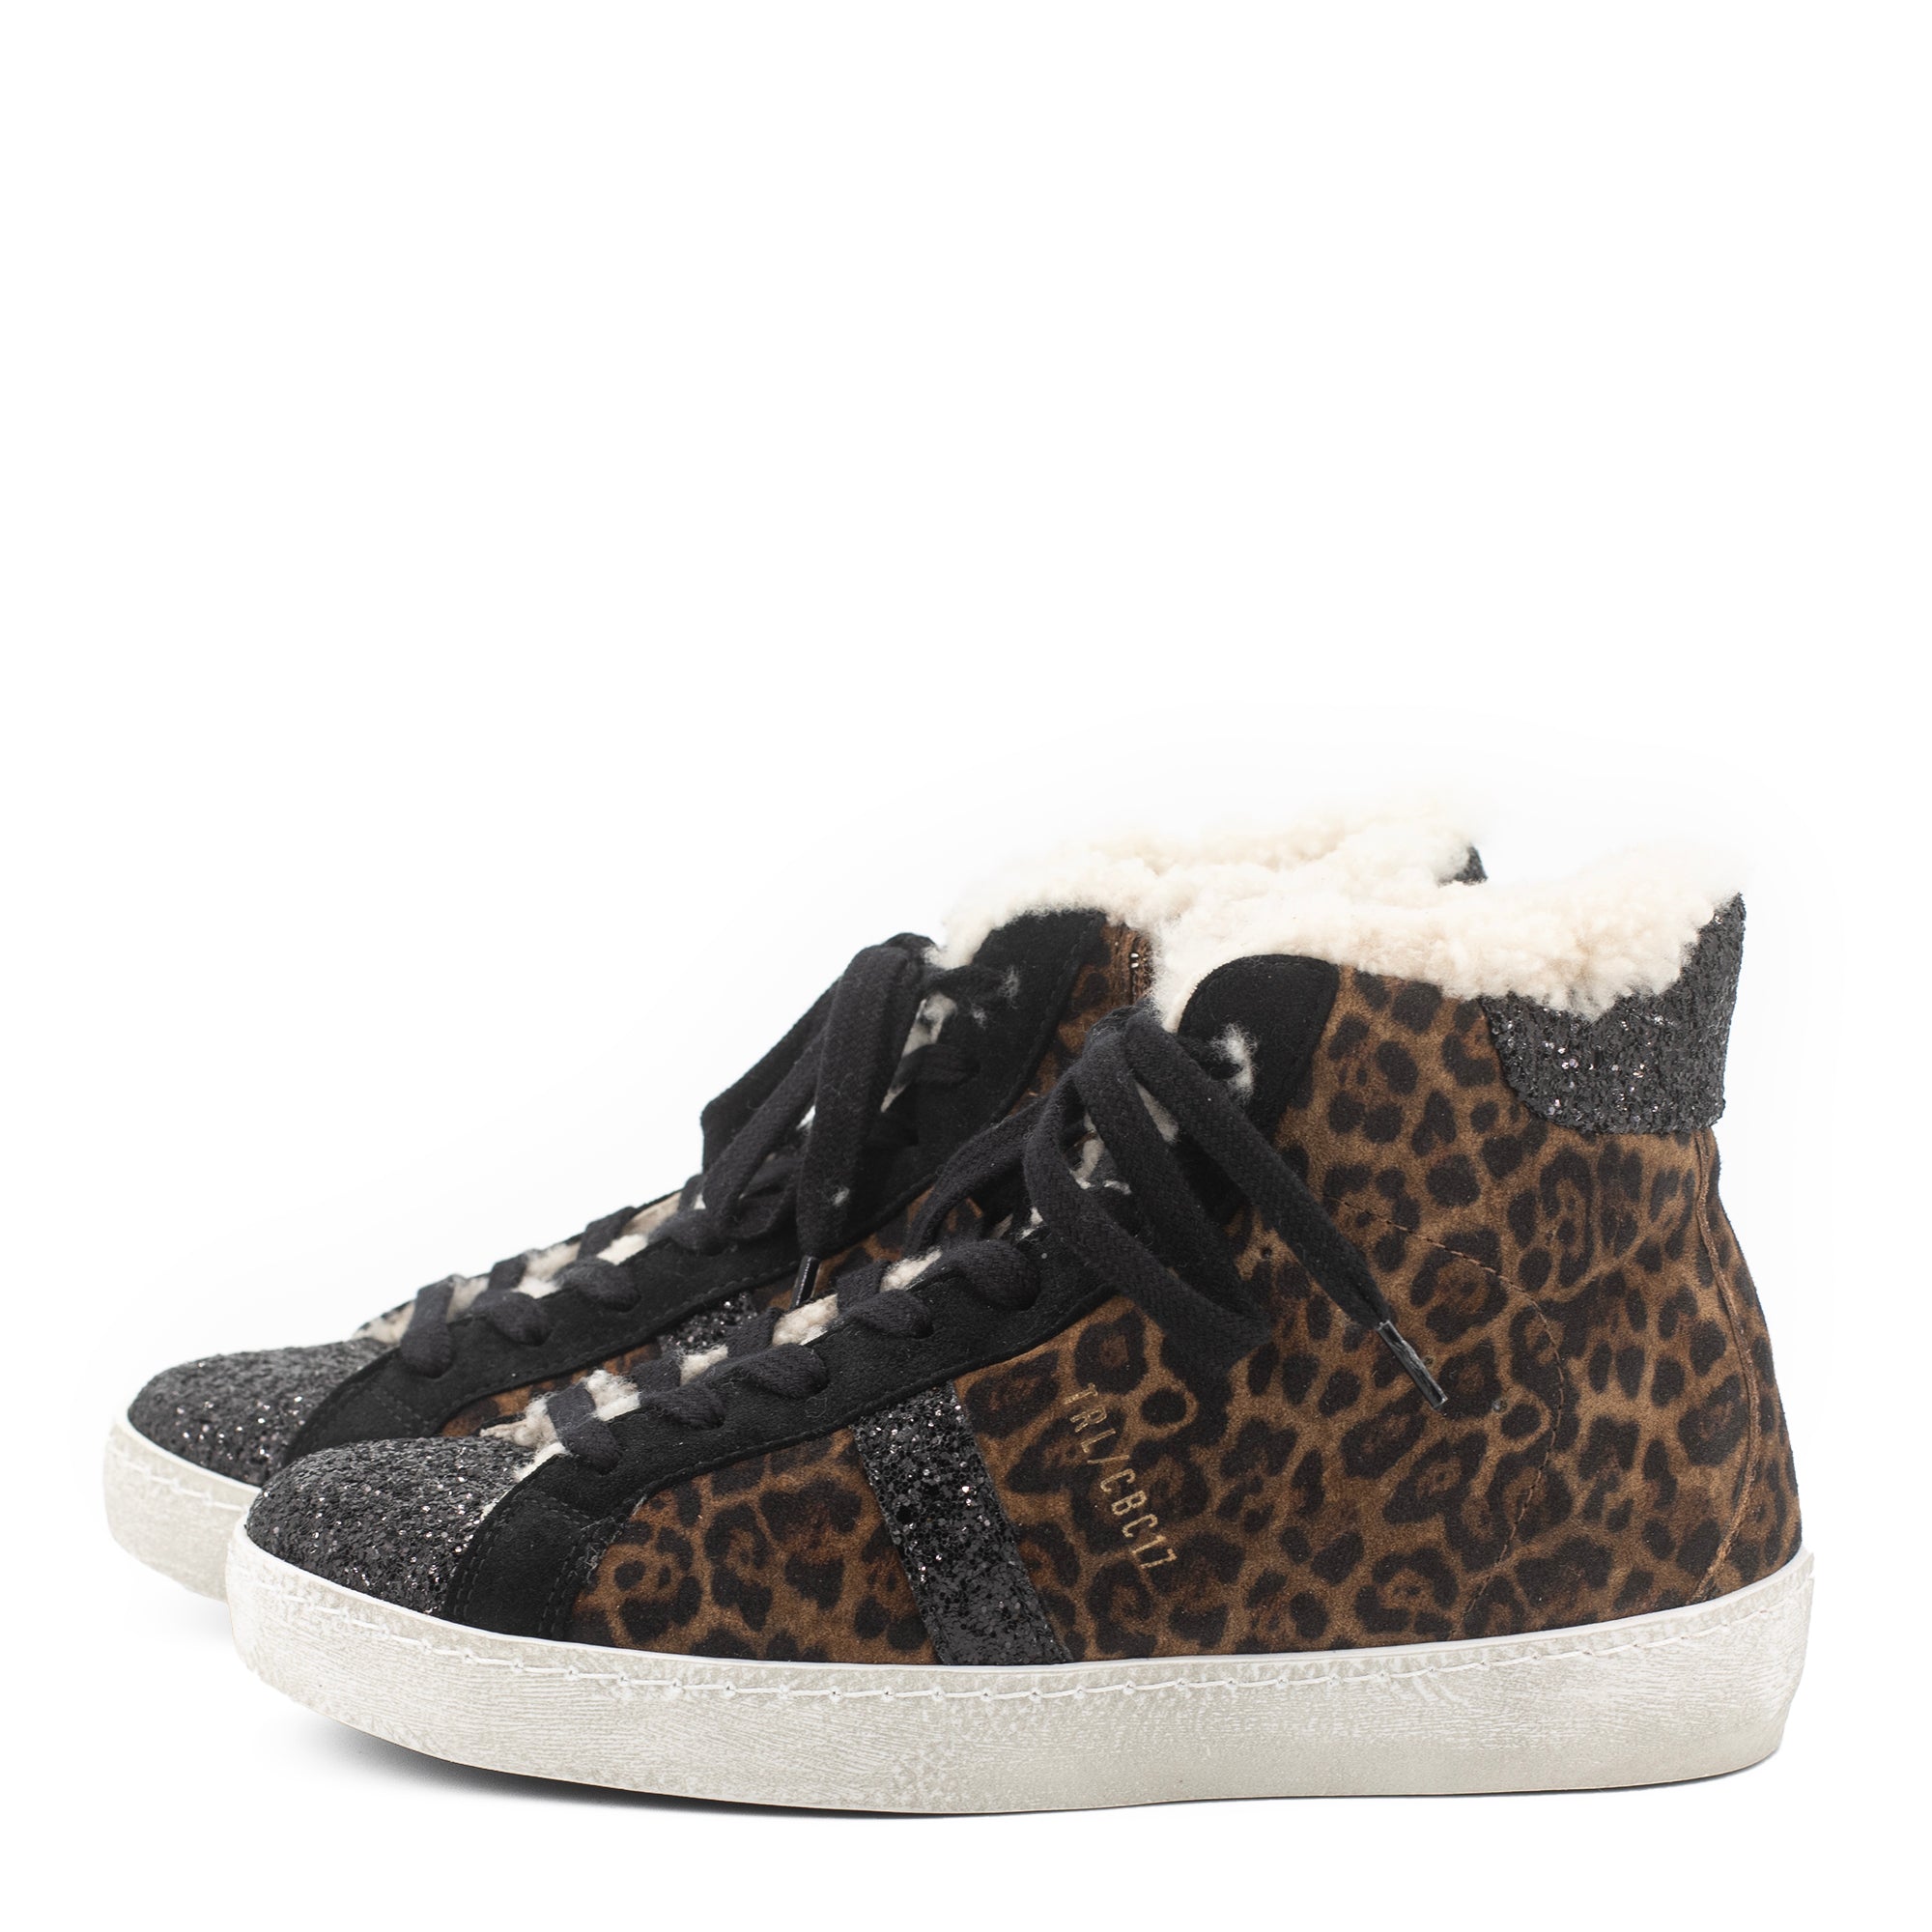 TORAL LEOPARD AND GLITTER HIGH-TOP SNEAKERS